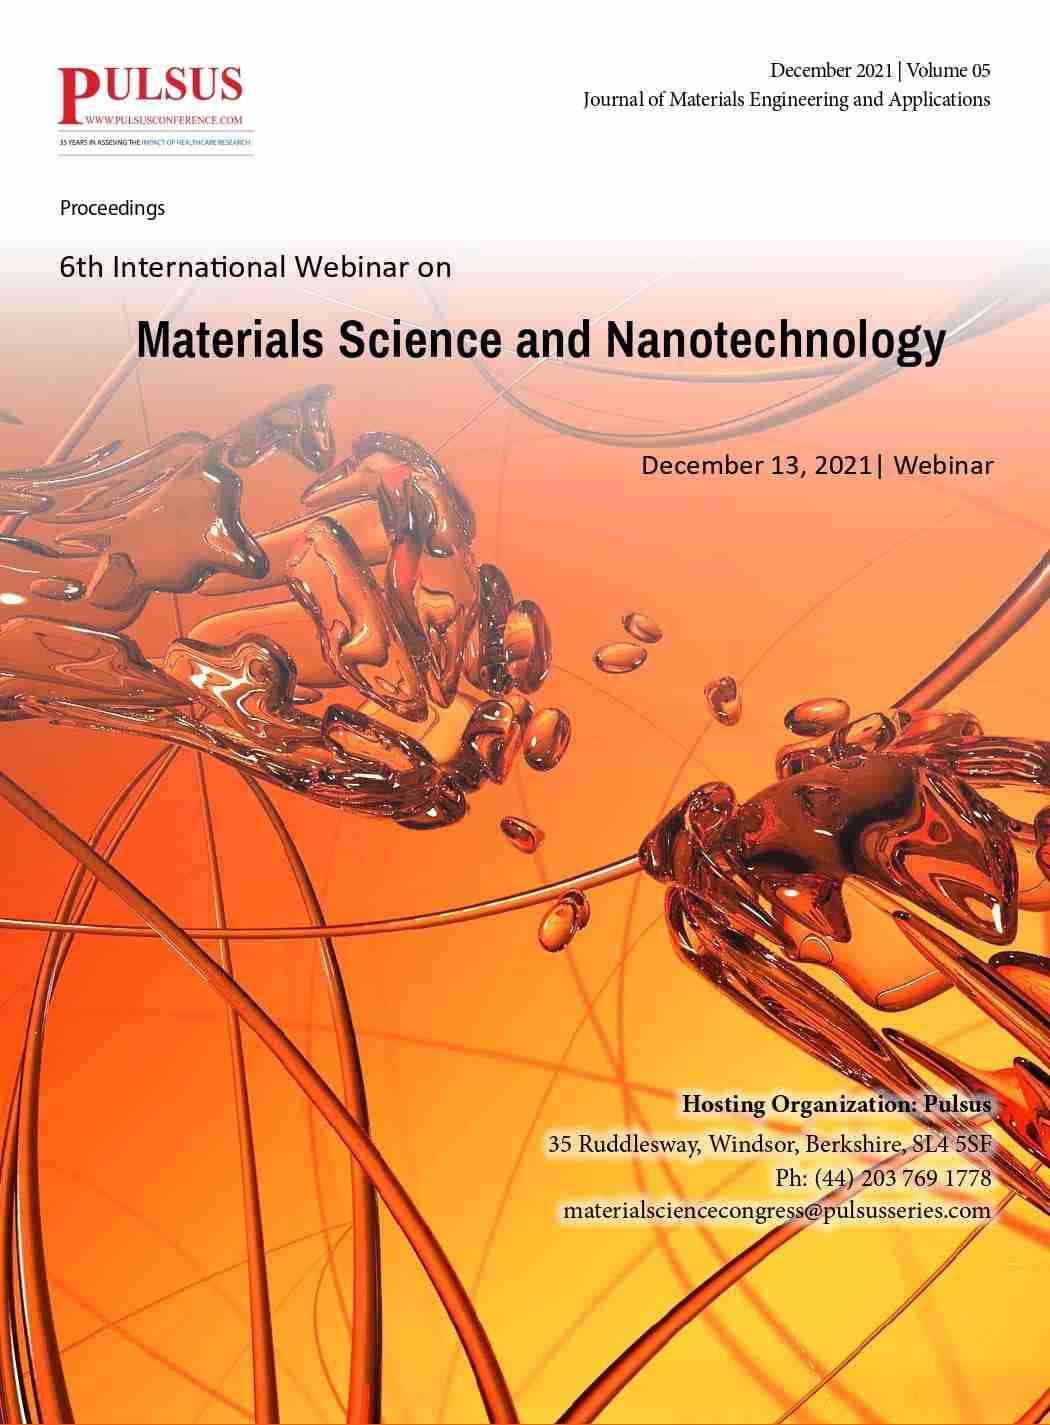 https://www.pulsus.com/special-issues/joint-event-on-4th-world-congress-on-nanoscience-and-nano-technology-and-5th-annual-congress-on-nanomedicine-and-drug-delivery.html